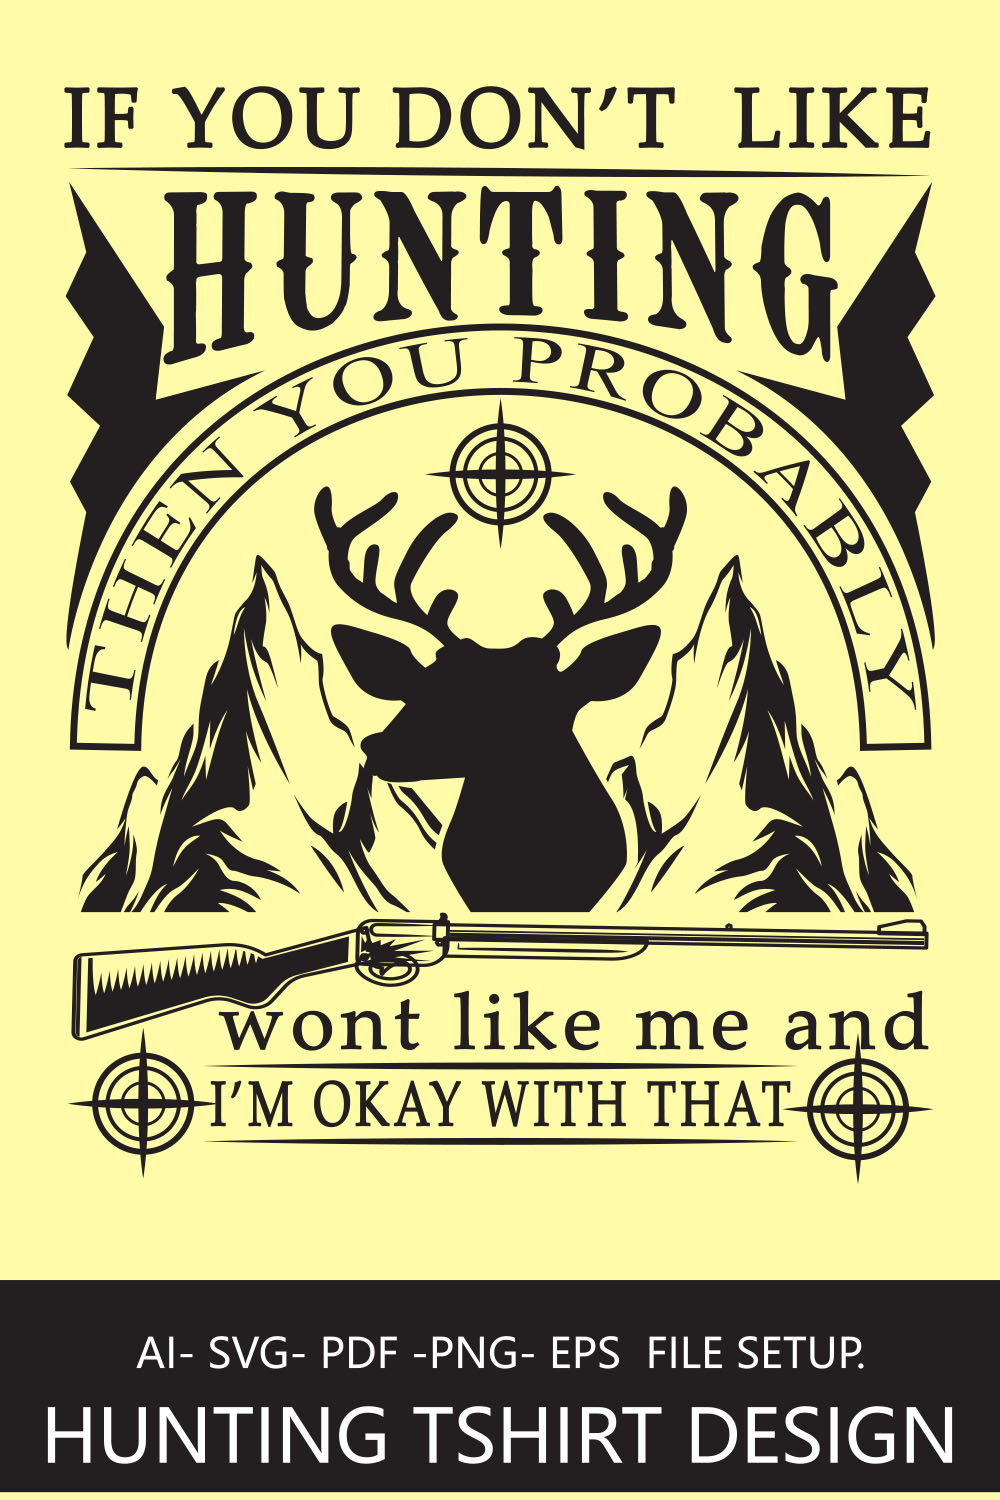 IF YOU DON’T LIKE HUNTINH THEN YOU PROBABLY WONT LIKE ME AND I’M OKAY WITH THAT pinterest preview image.